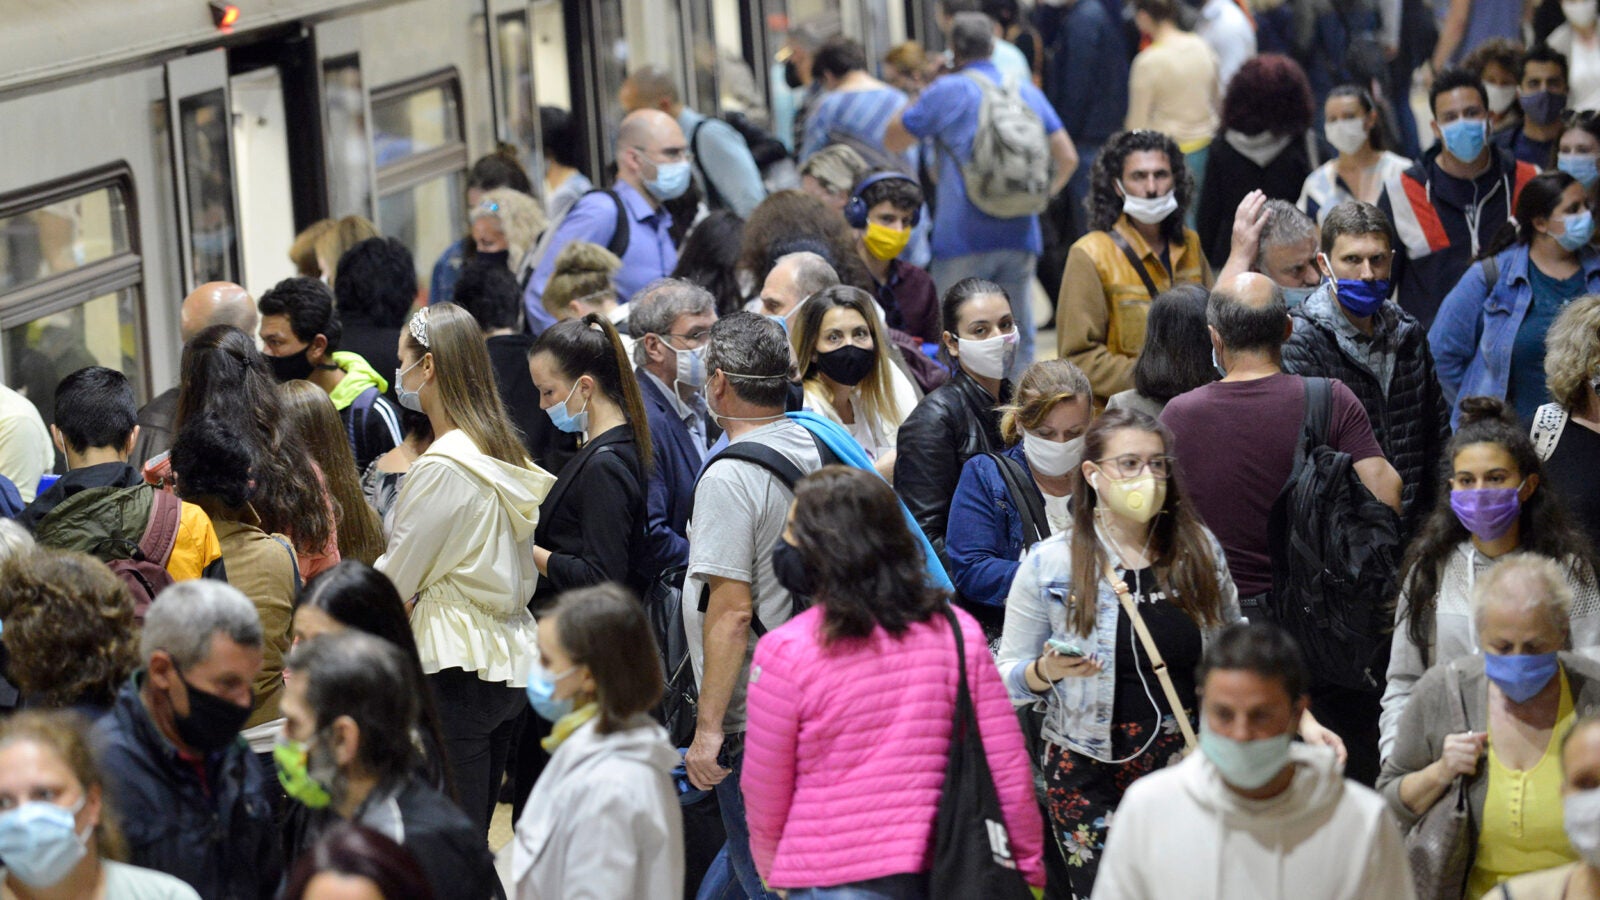 People in a crowd wearing masks.